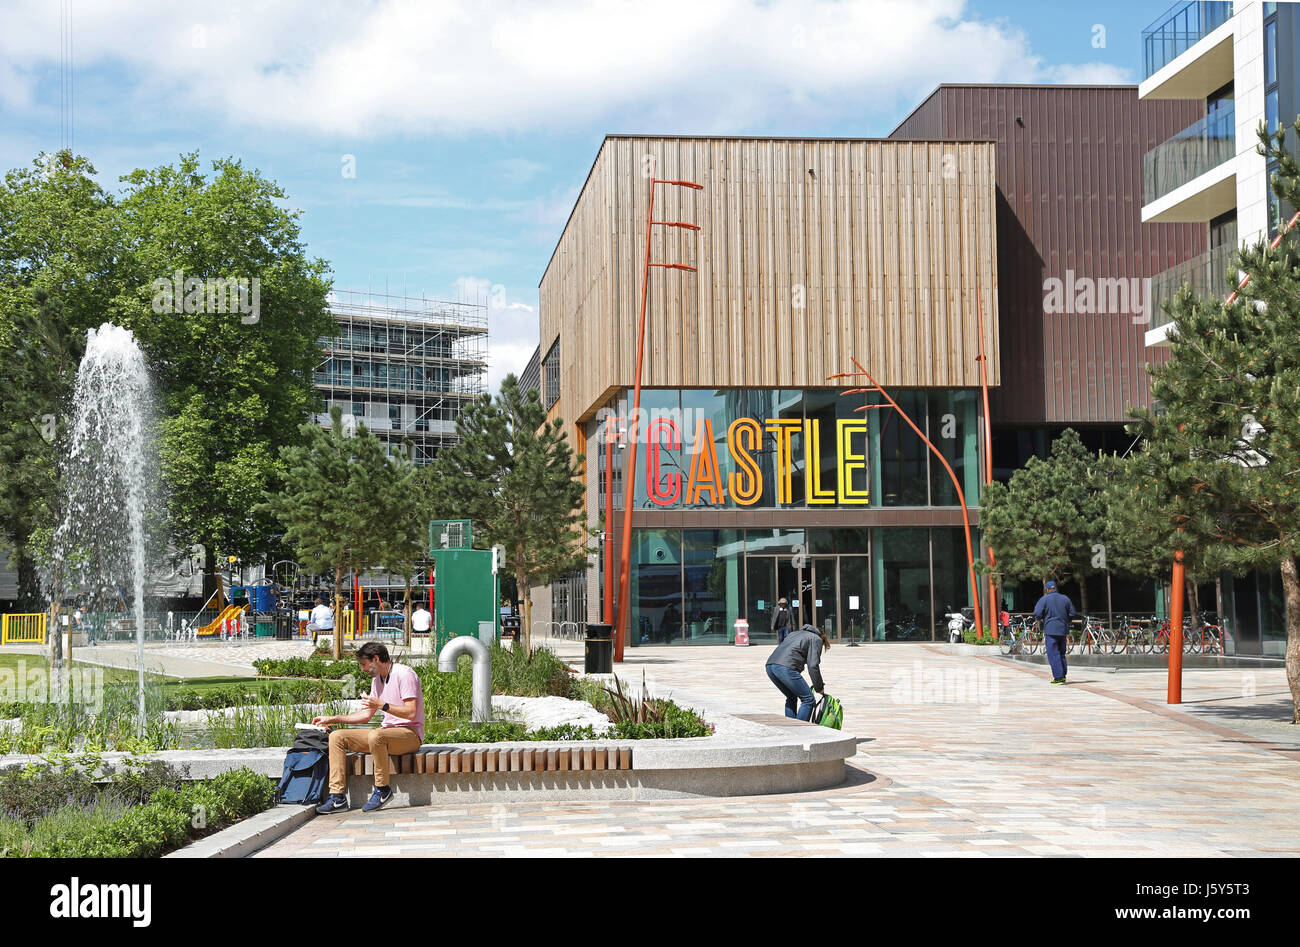 The new Castle Leisure Centre at London's Elephant and Castle junction. Part of the major redevelopment of this busy inner-city area Stock Photo